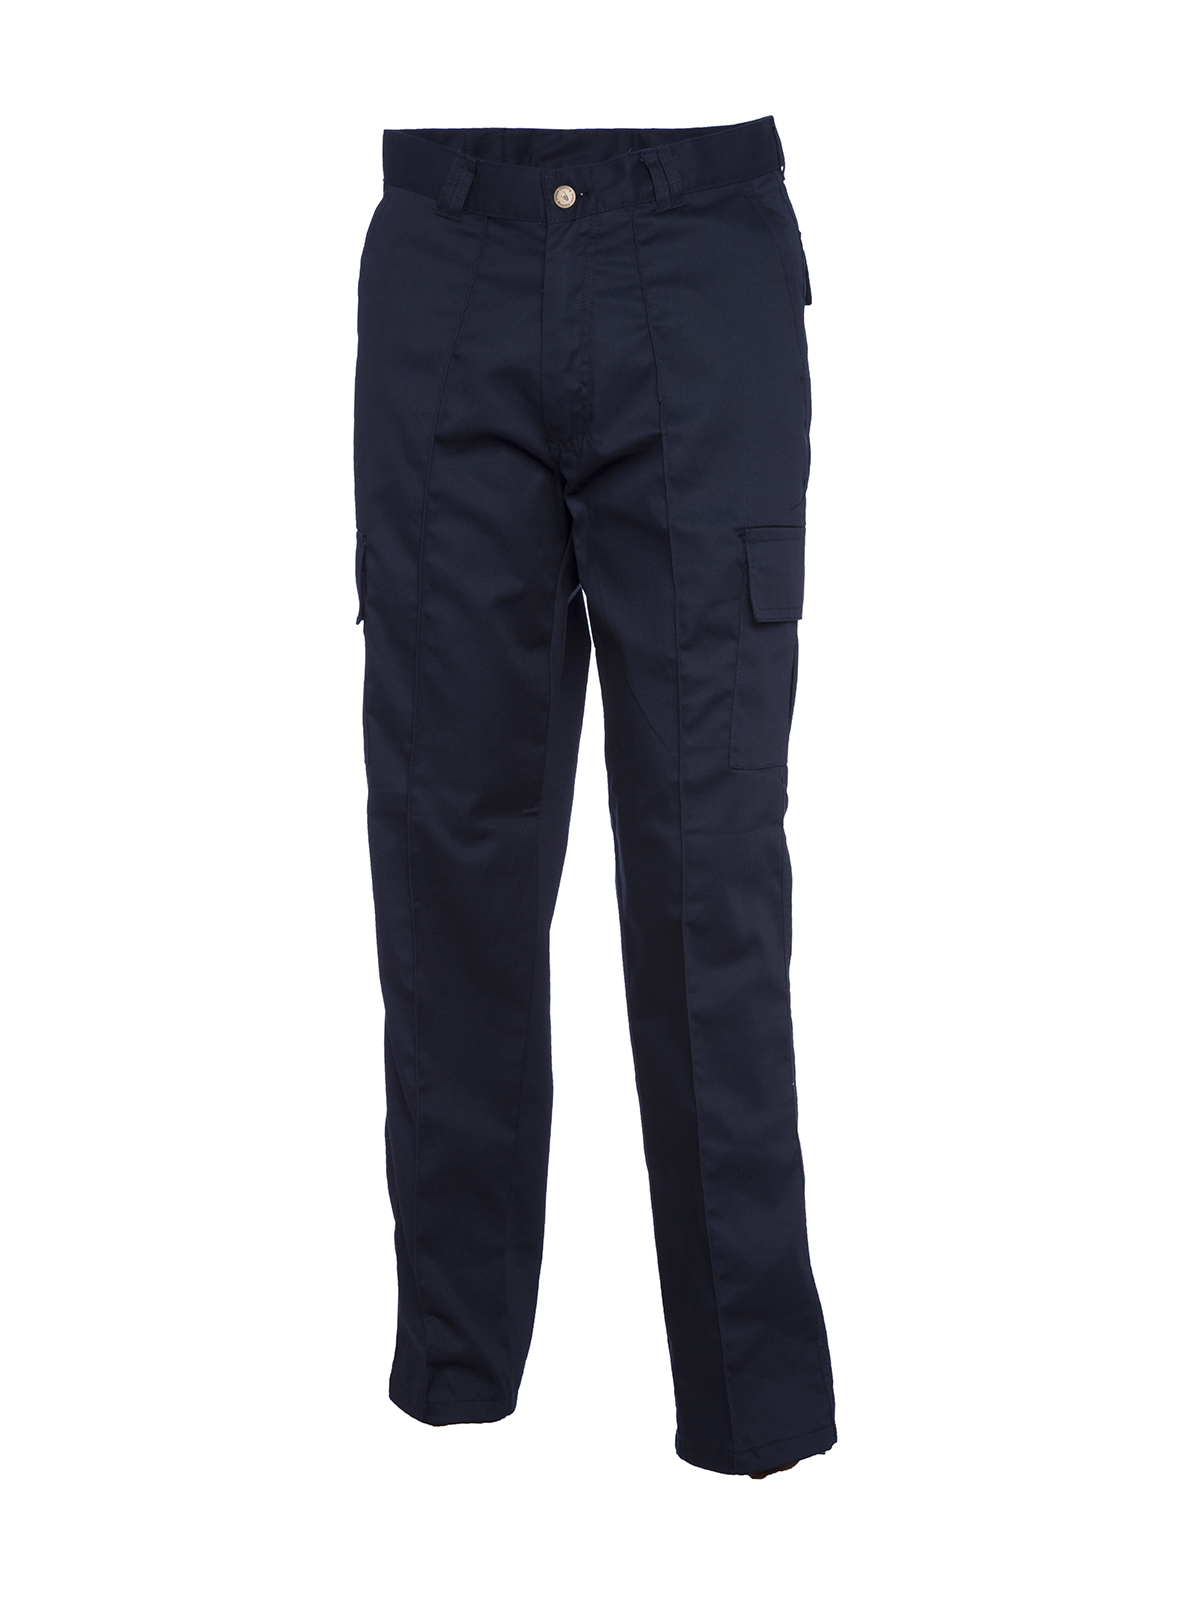 Cargo Trousers, Navy Blue - 28S